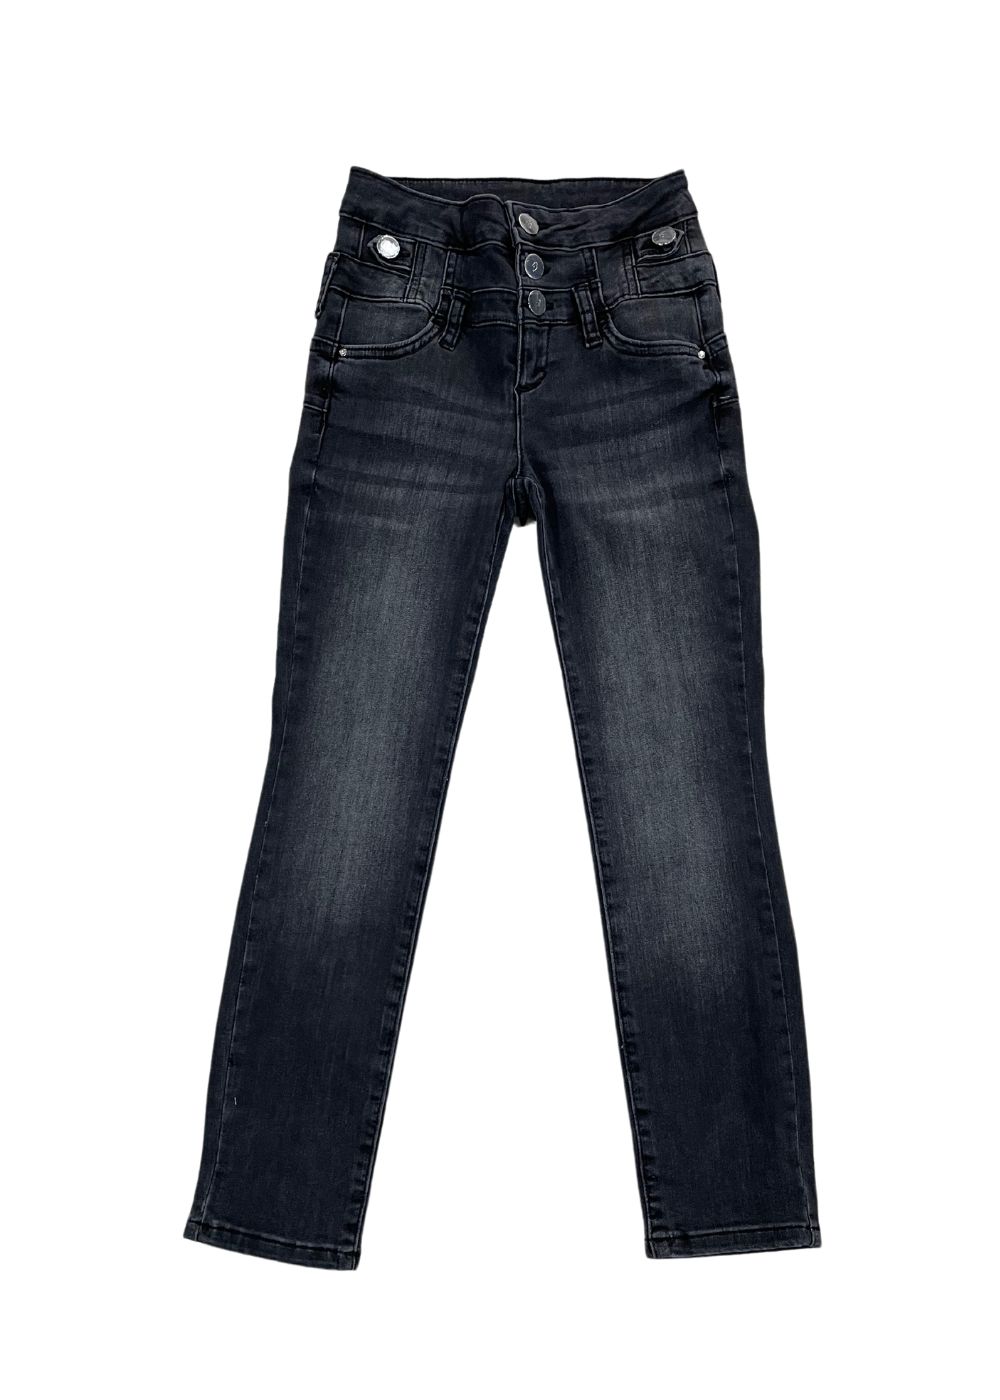 Featured image for “Liu Jo Jeans Nero”